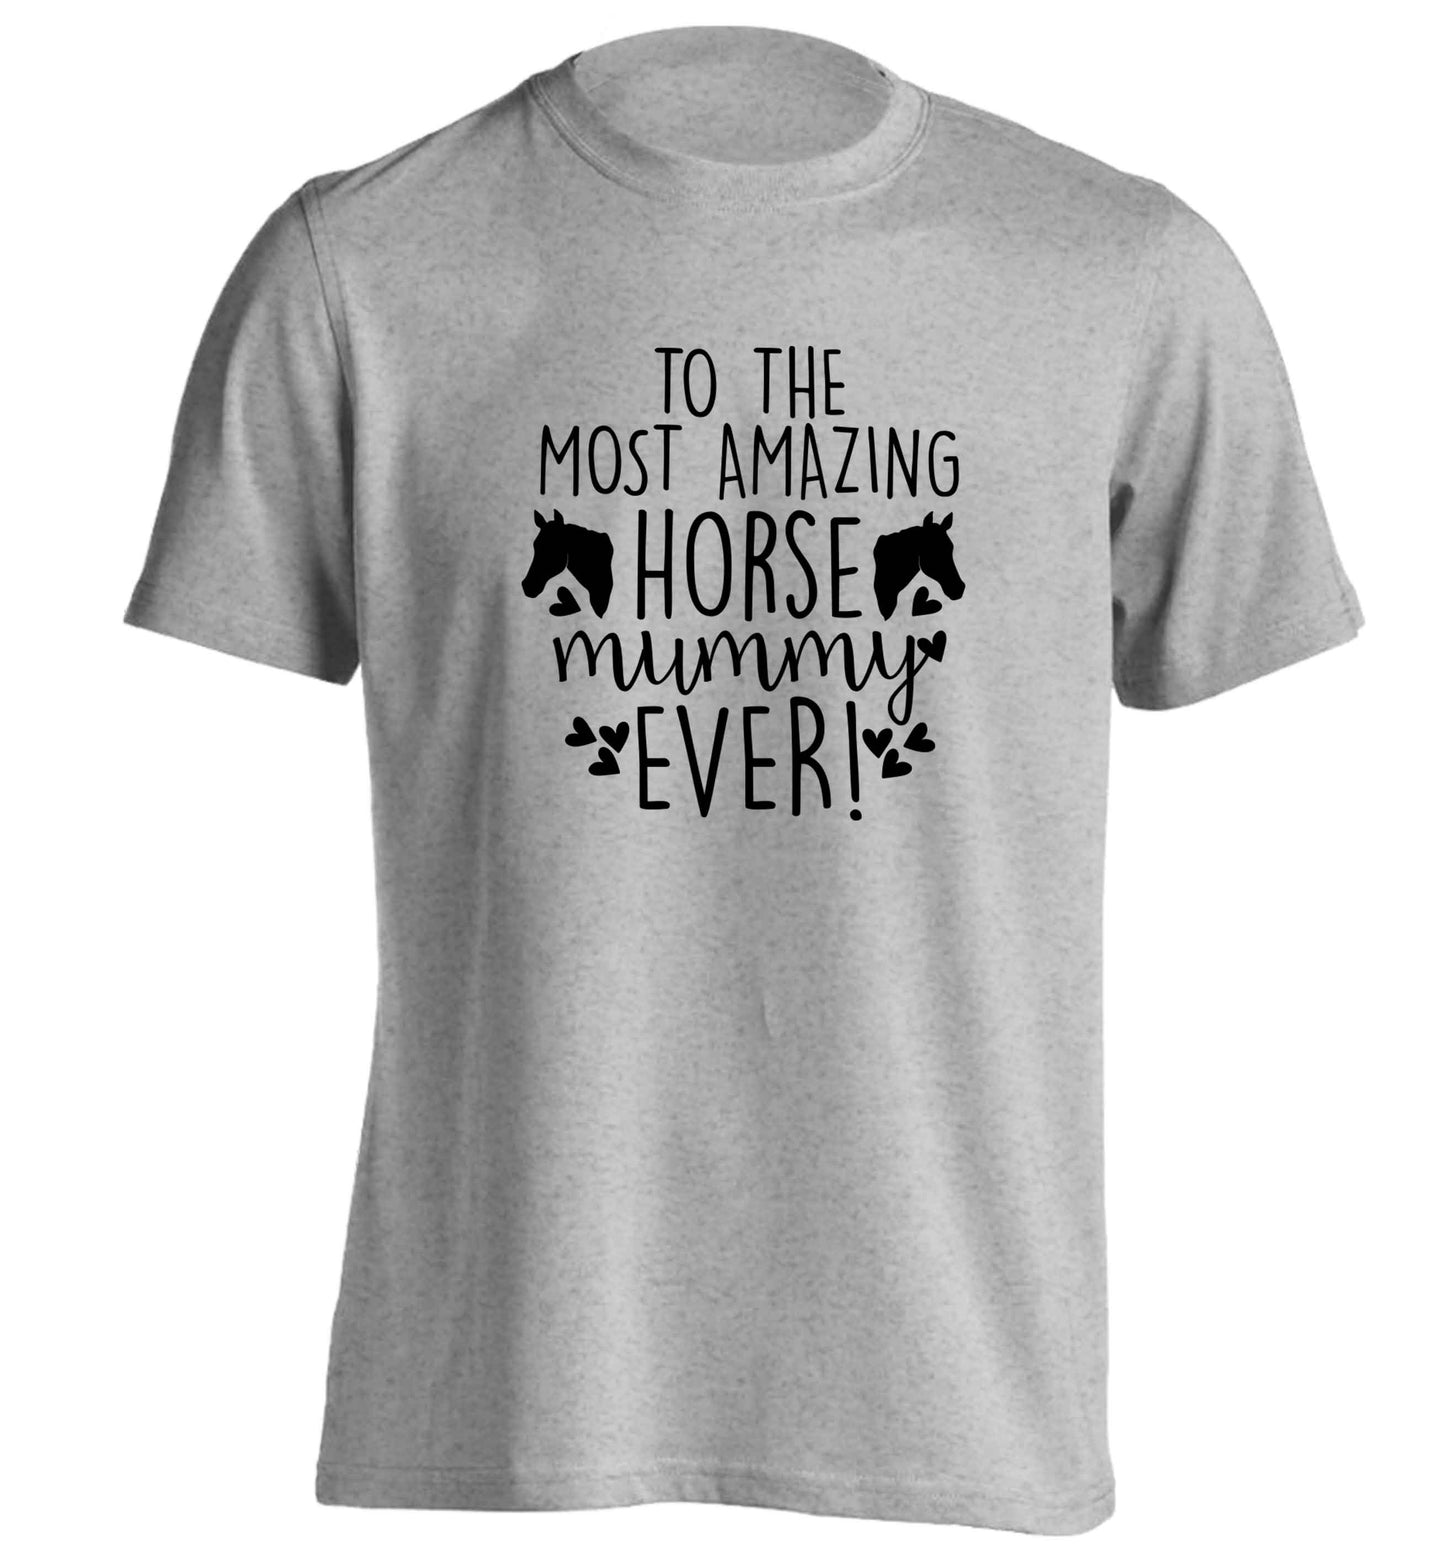 To the most amazing horse mummy ever! adults unisex grey Tshirt 2XL